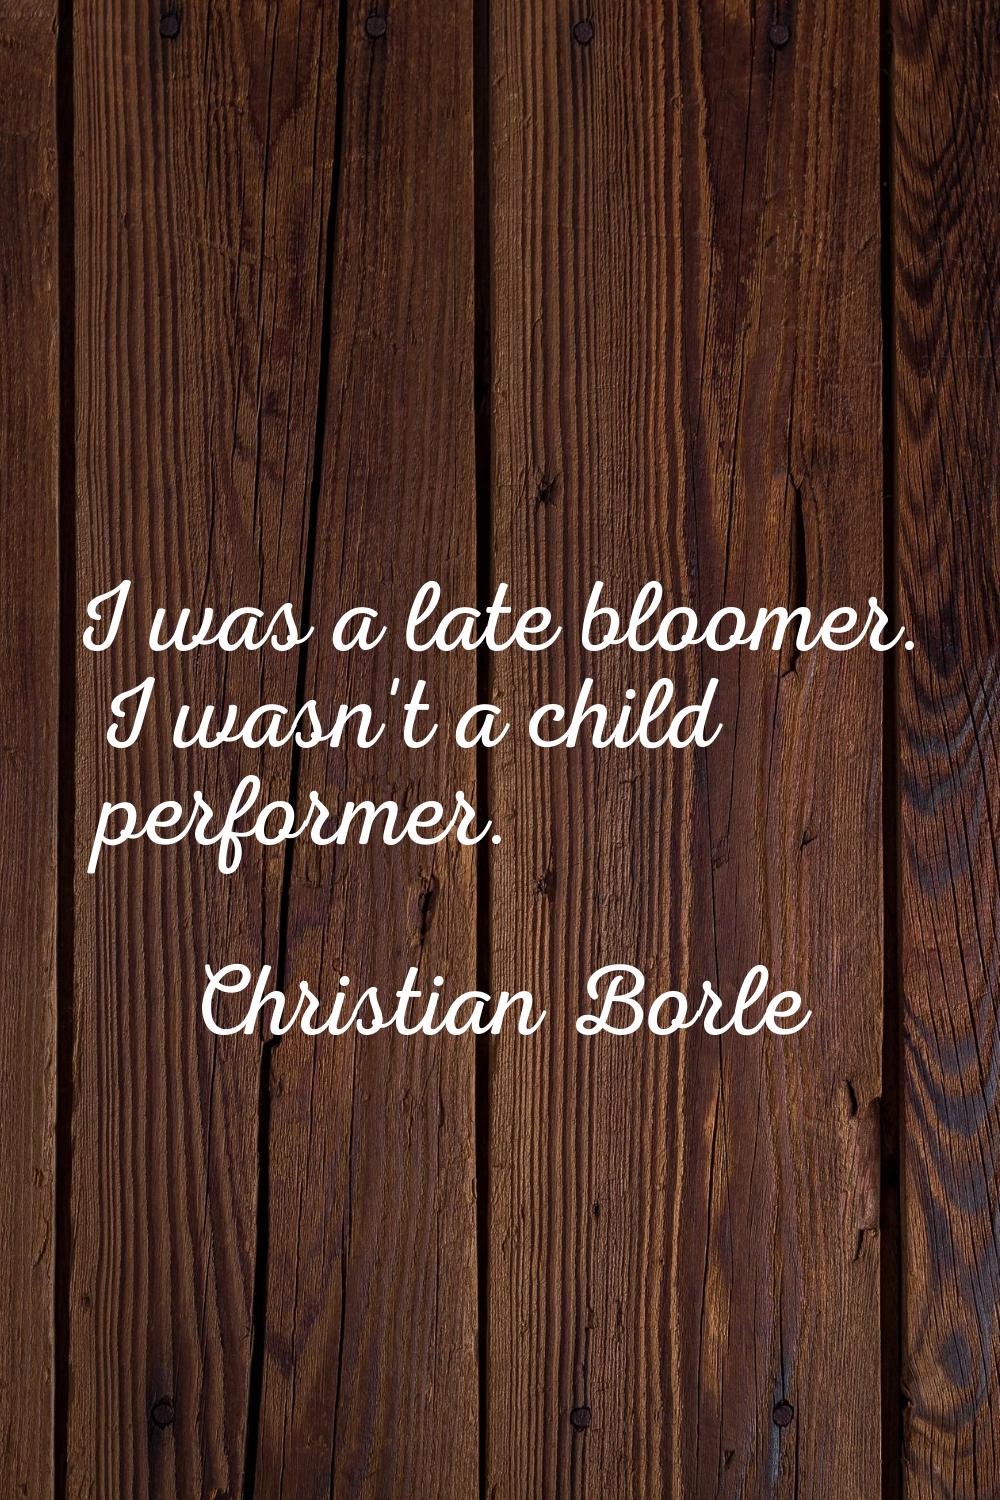 I was a late bloomer. I wasn't a child performer.